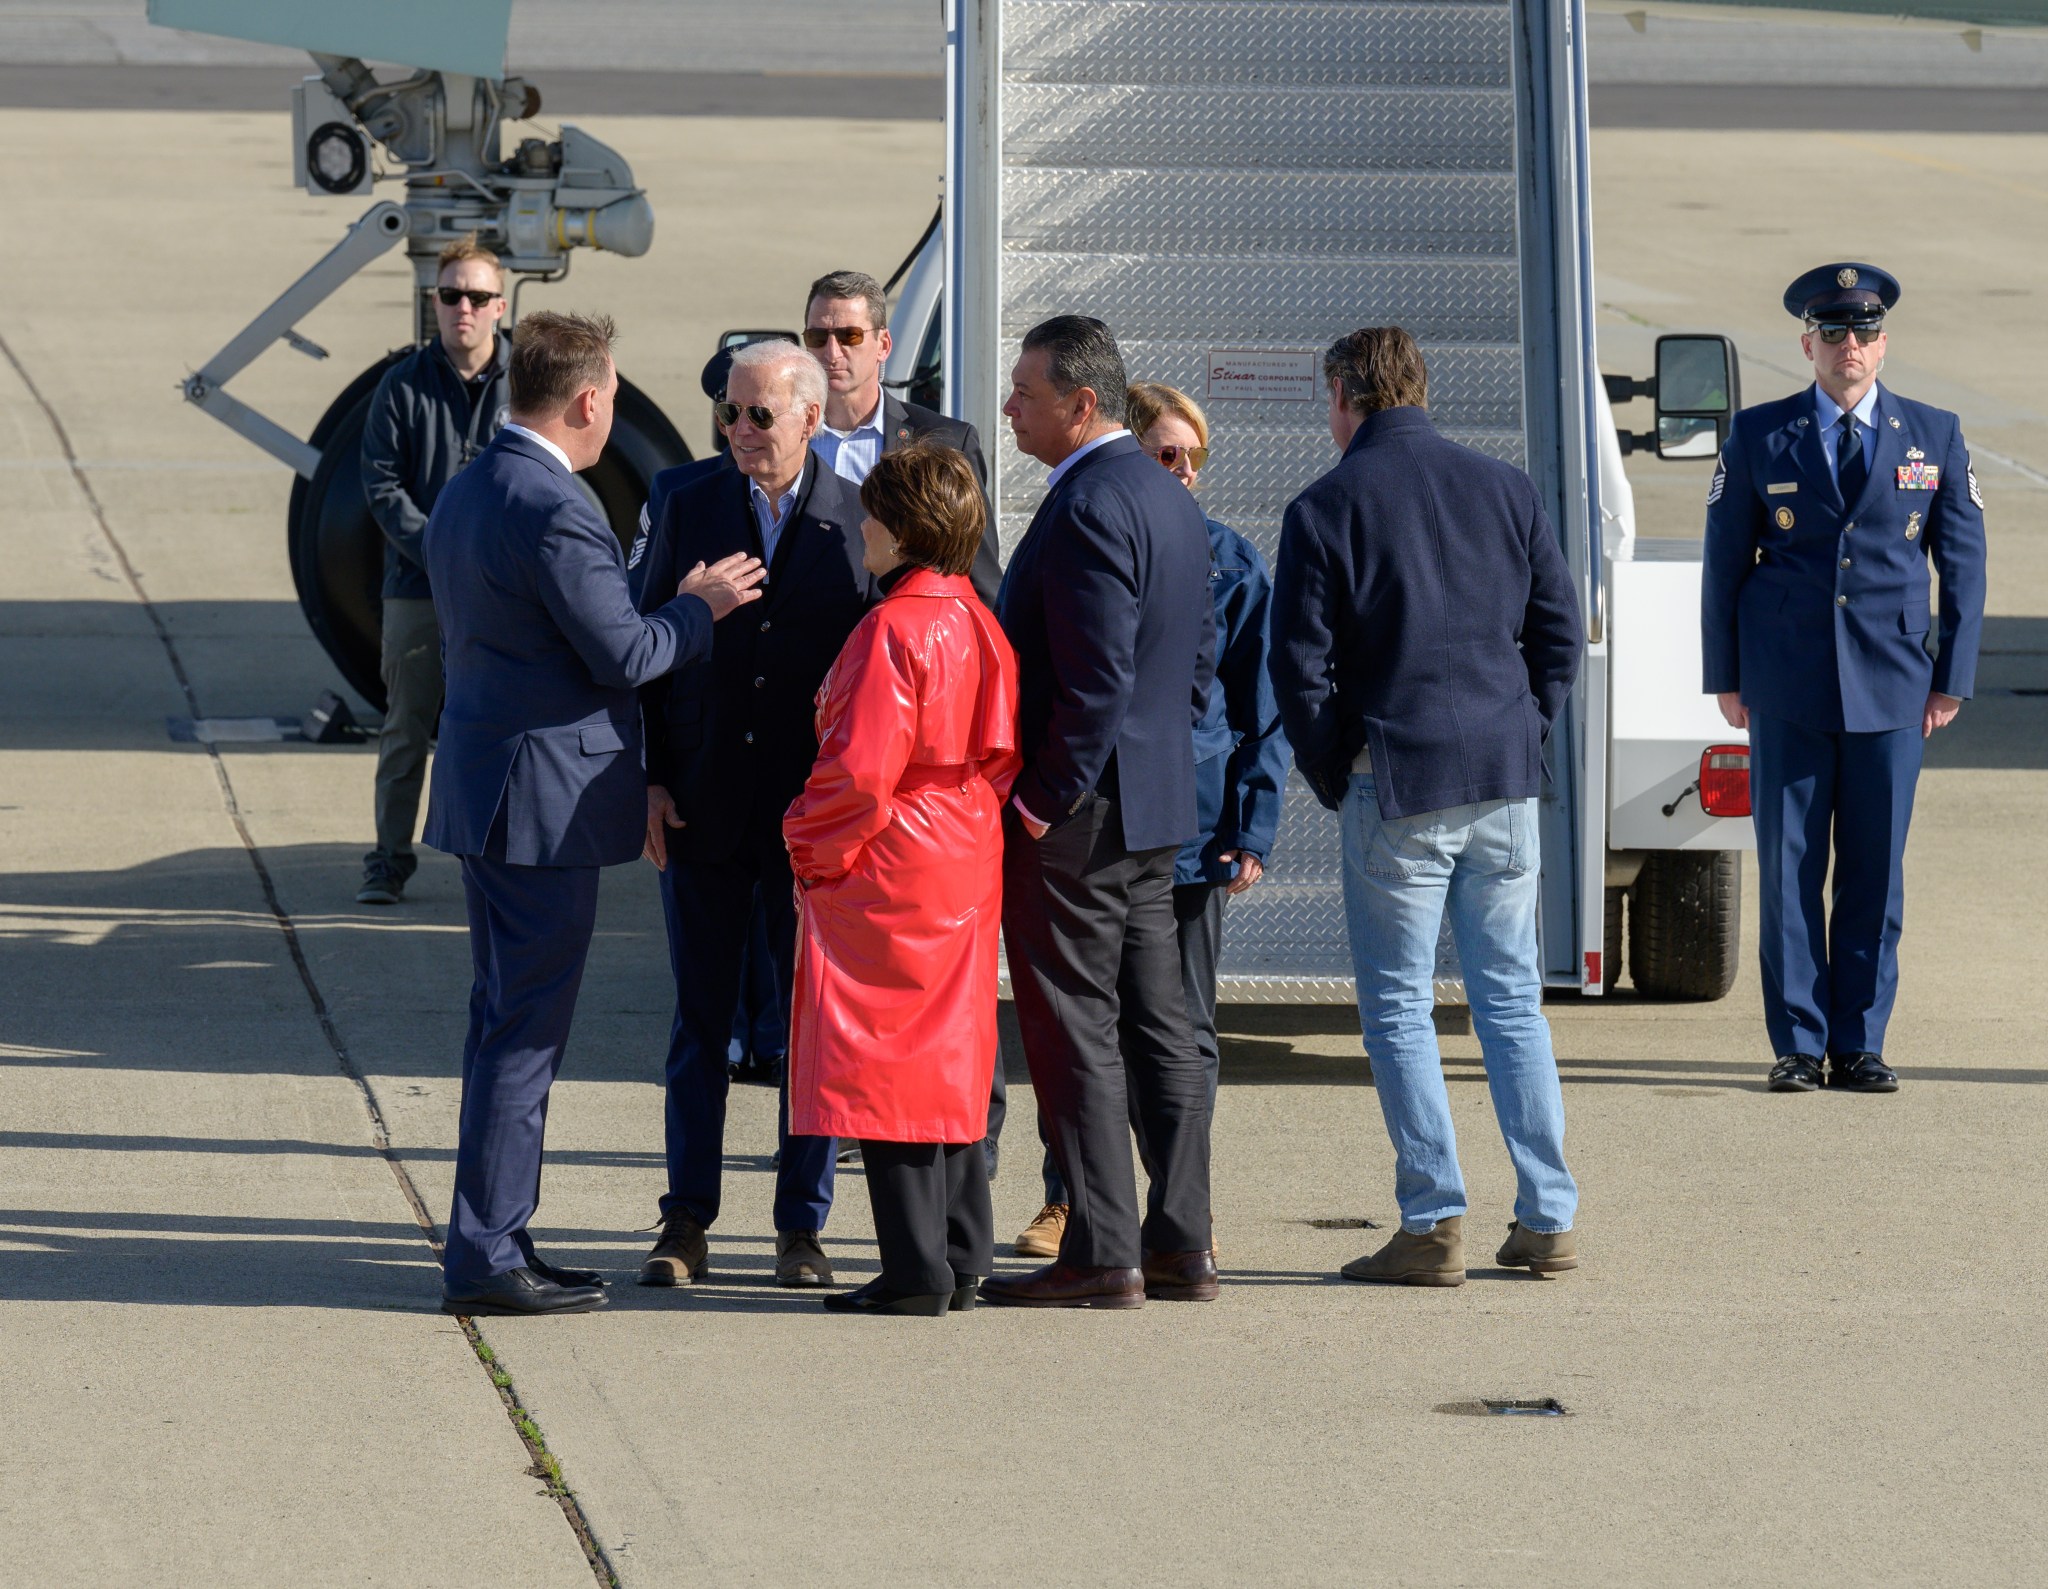 A group of people gather in front of the stairs to an airplane. At center, President Joe Biden speaks to two men in dark blue suits and a woman in a red raincoat.